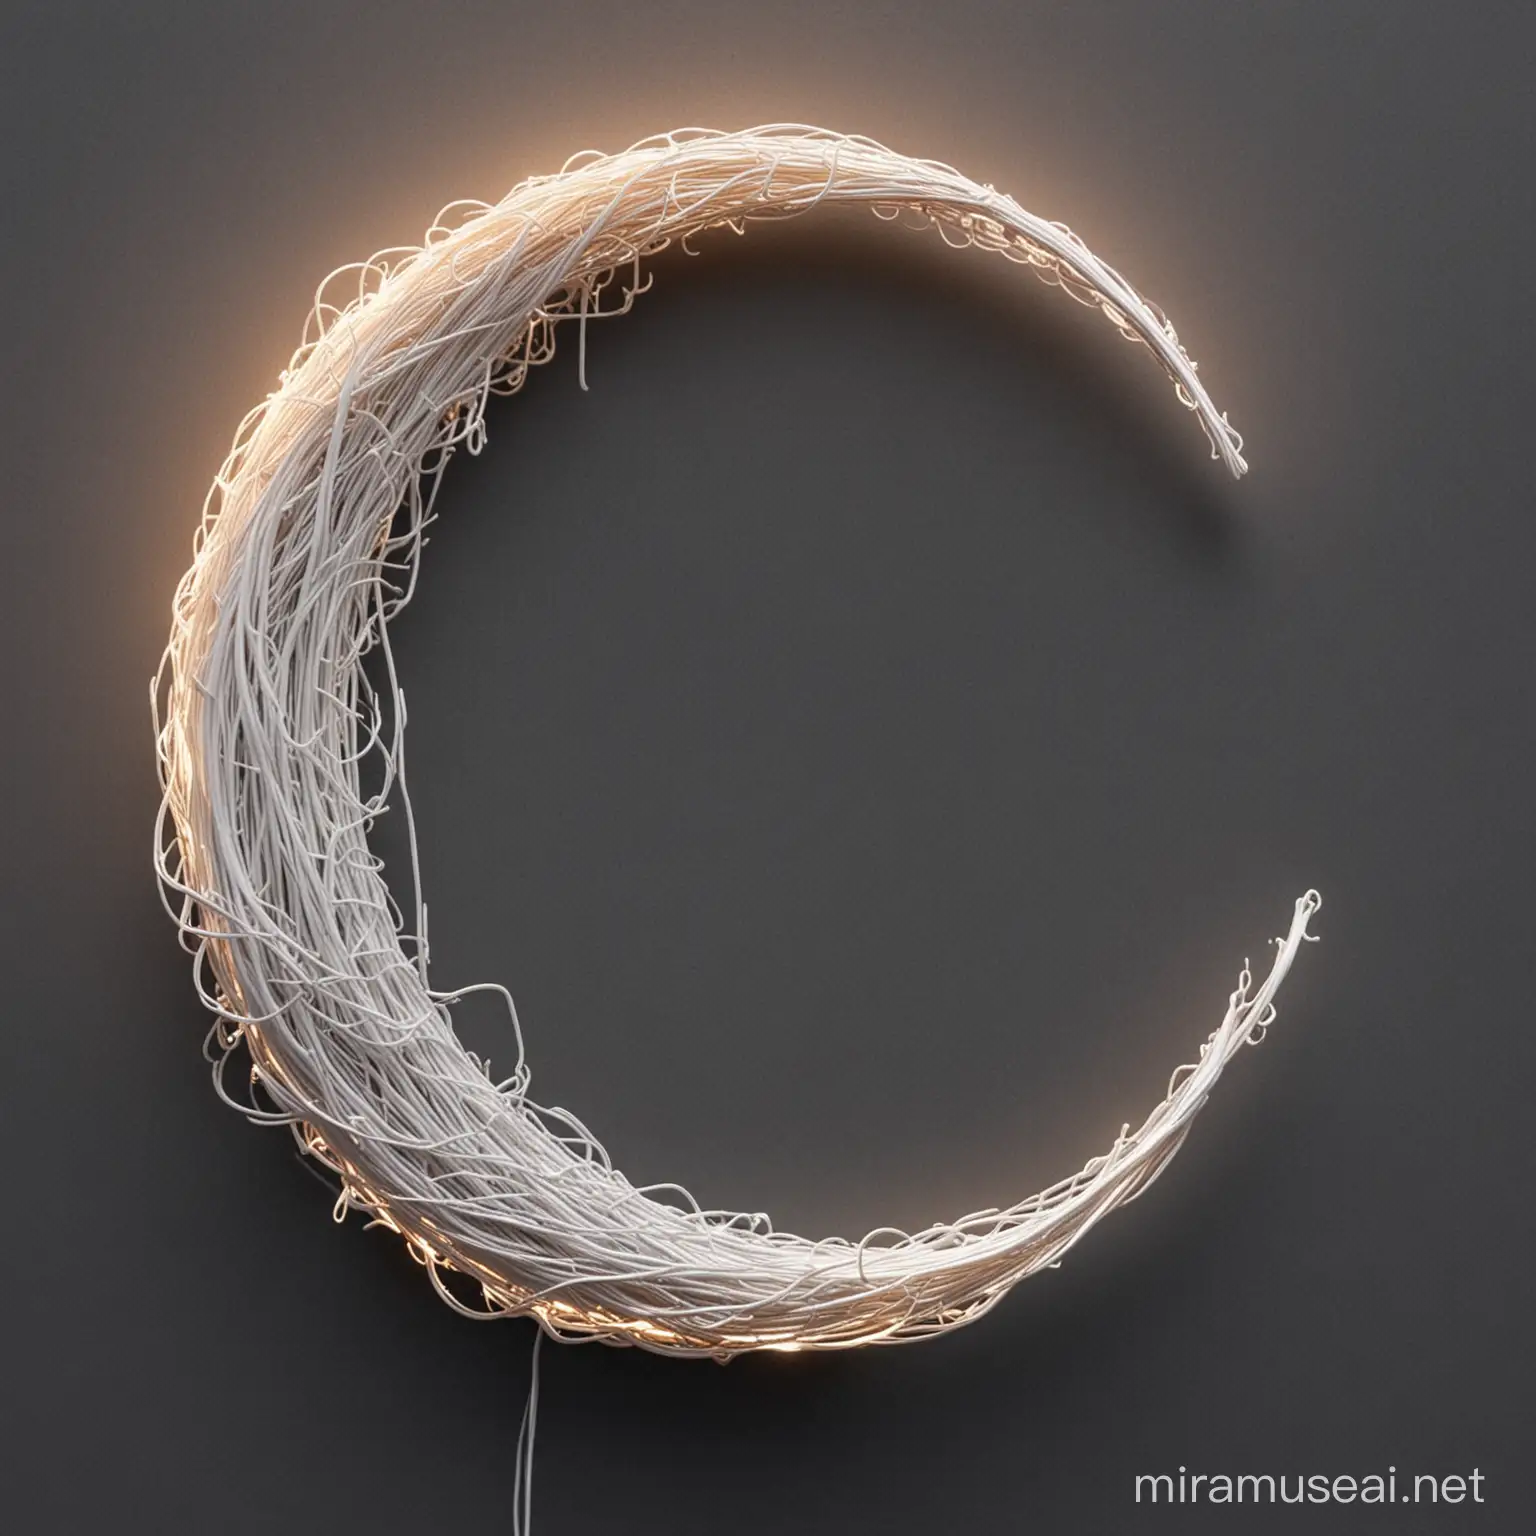 Create a image of waning crescent Moon formed with a electric white wire